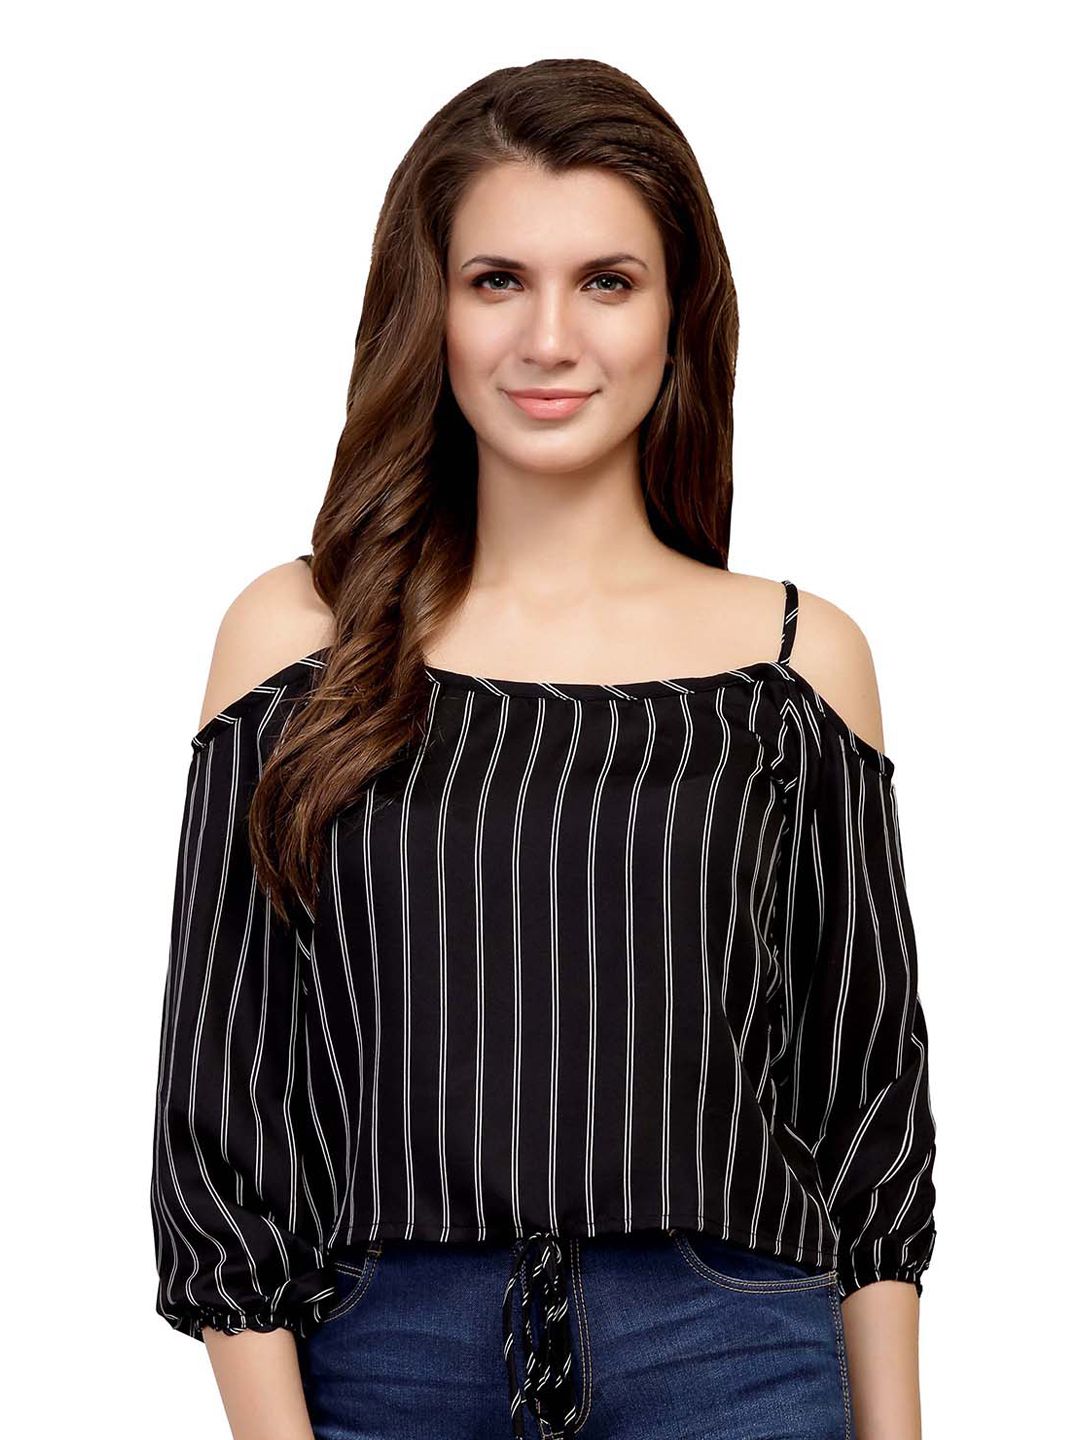 CHIMPAAANZEE Striped Shoulder Straps Cold-Shoulder With Tie-Ups  Top Price in India